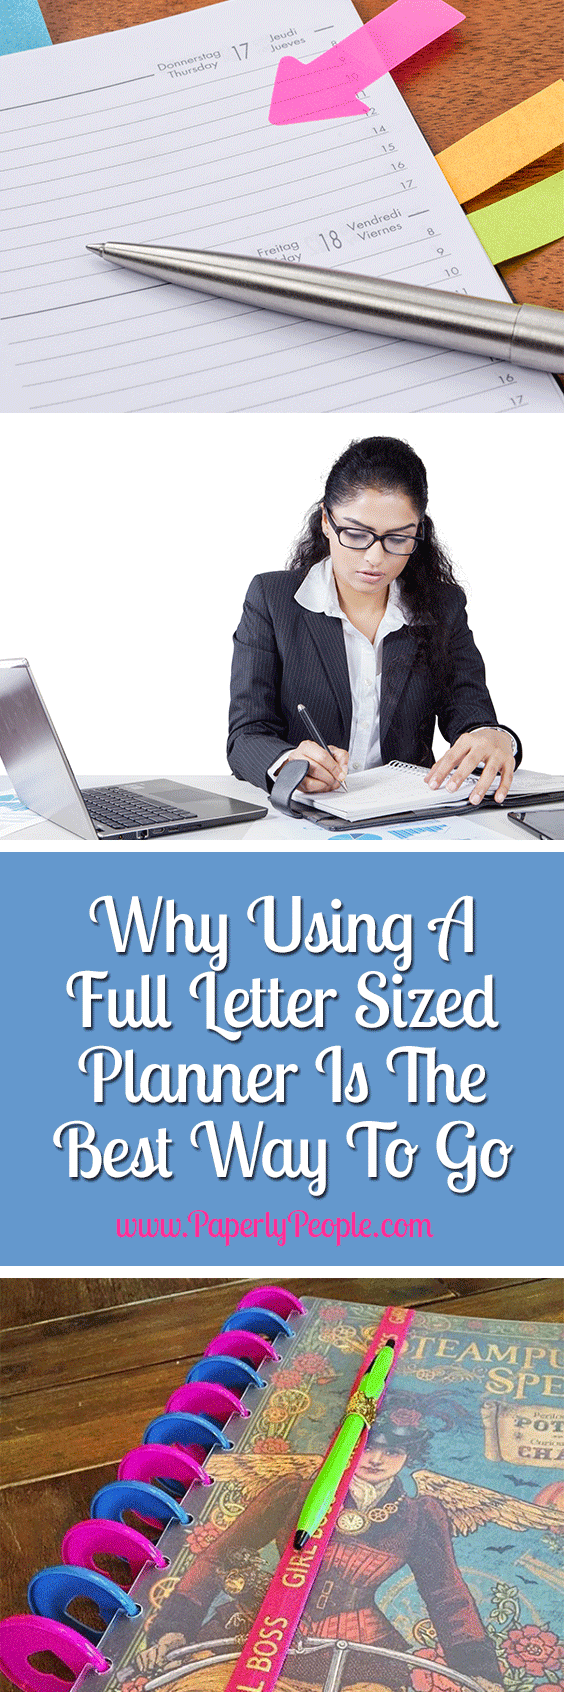 Why Using A Full Letter Sized Planner Is The Best Way To Go | ...But the bad part was that I was spending so much time tricking out my planner, that I was losing time actually WORKING in my planner. Are you kidding me? I am time challenged already and now my planner is killing more time?